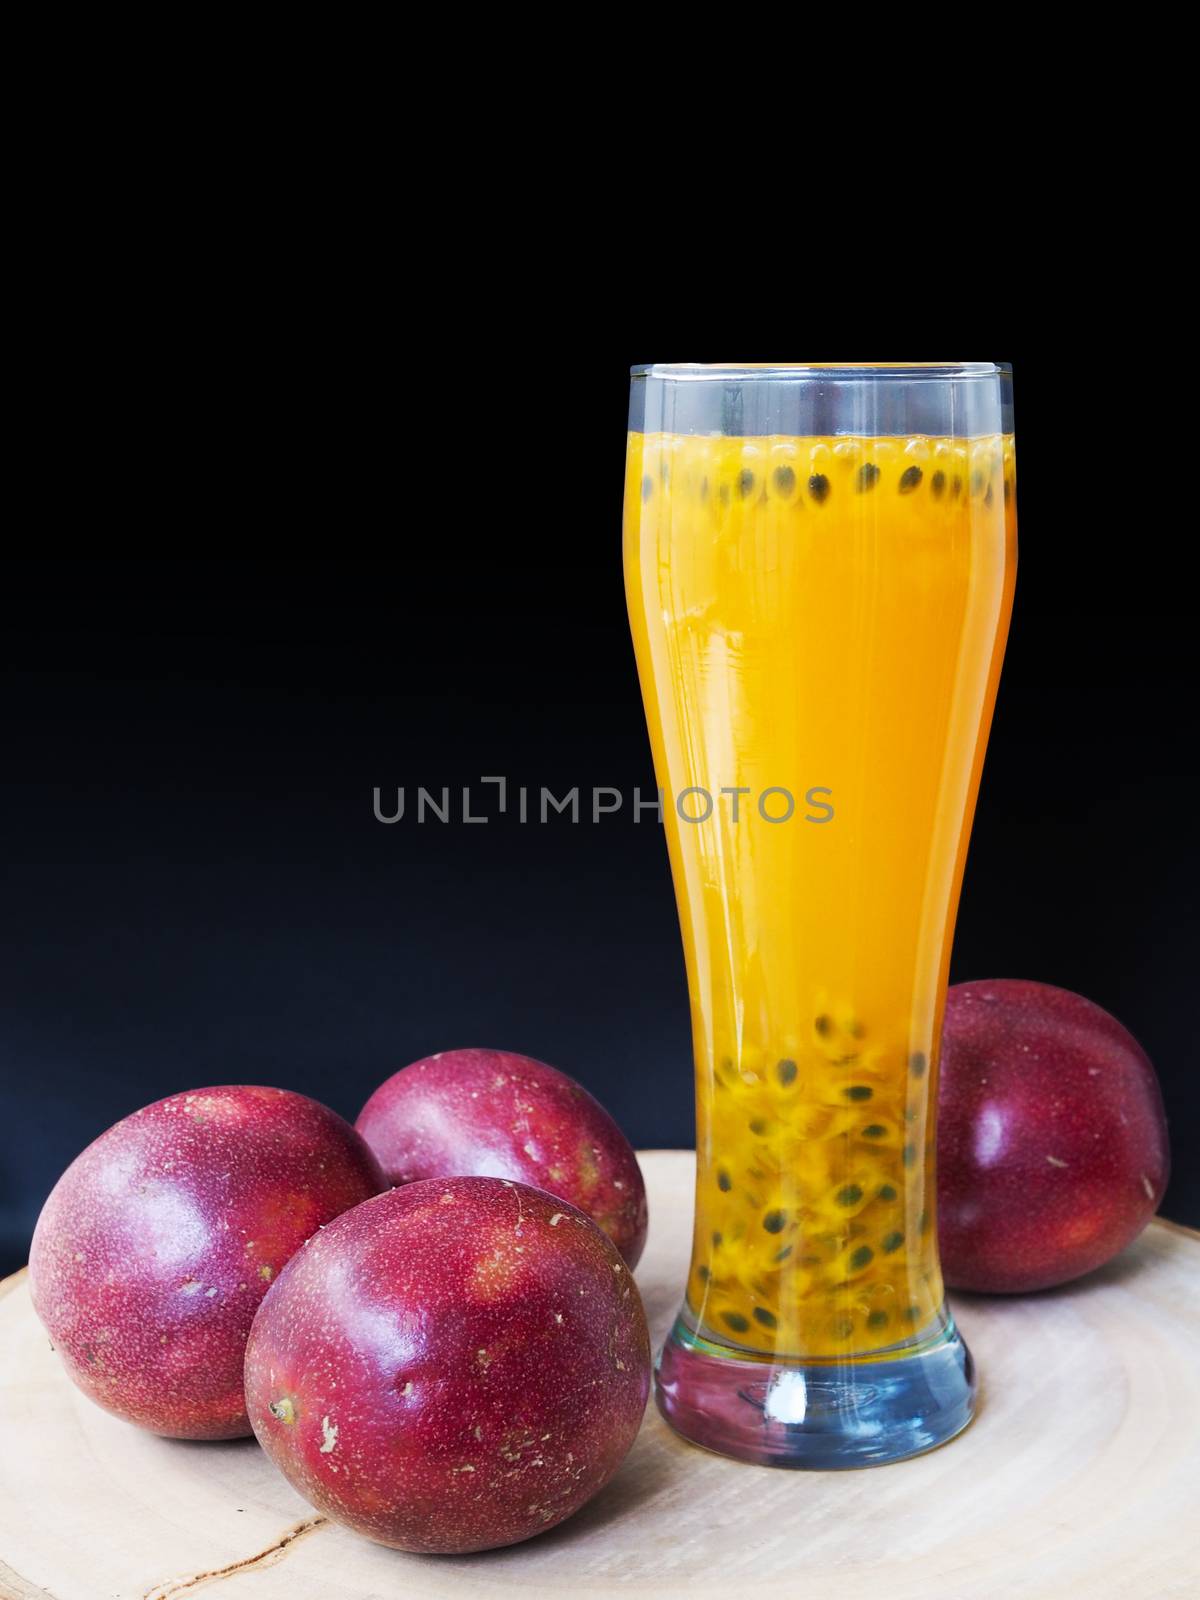 Refreshing drink with yellow juice in a glass made passion fruit by kittima05